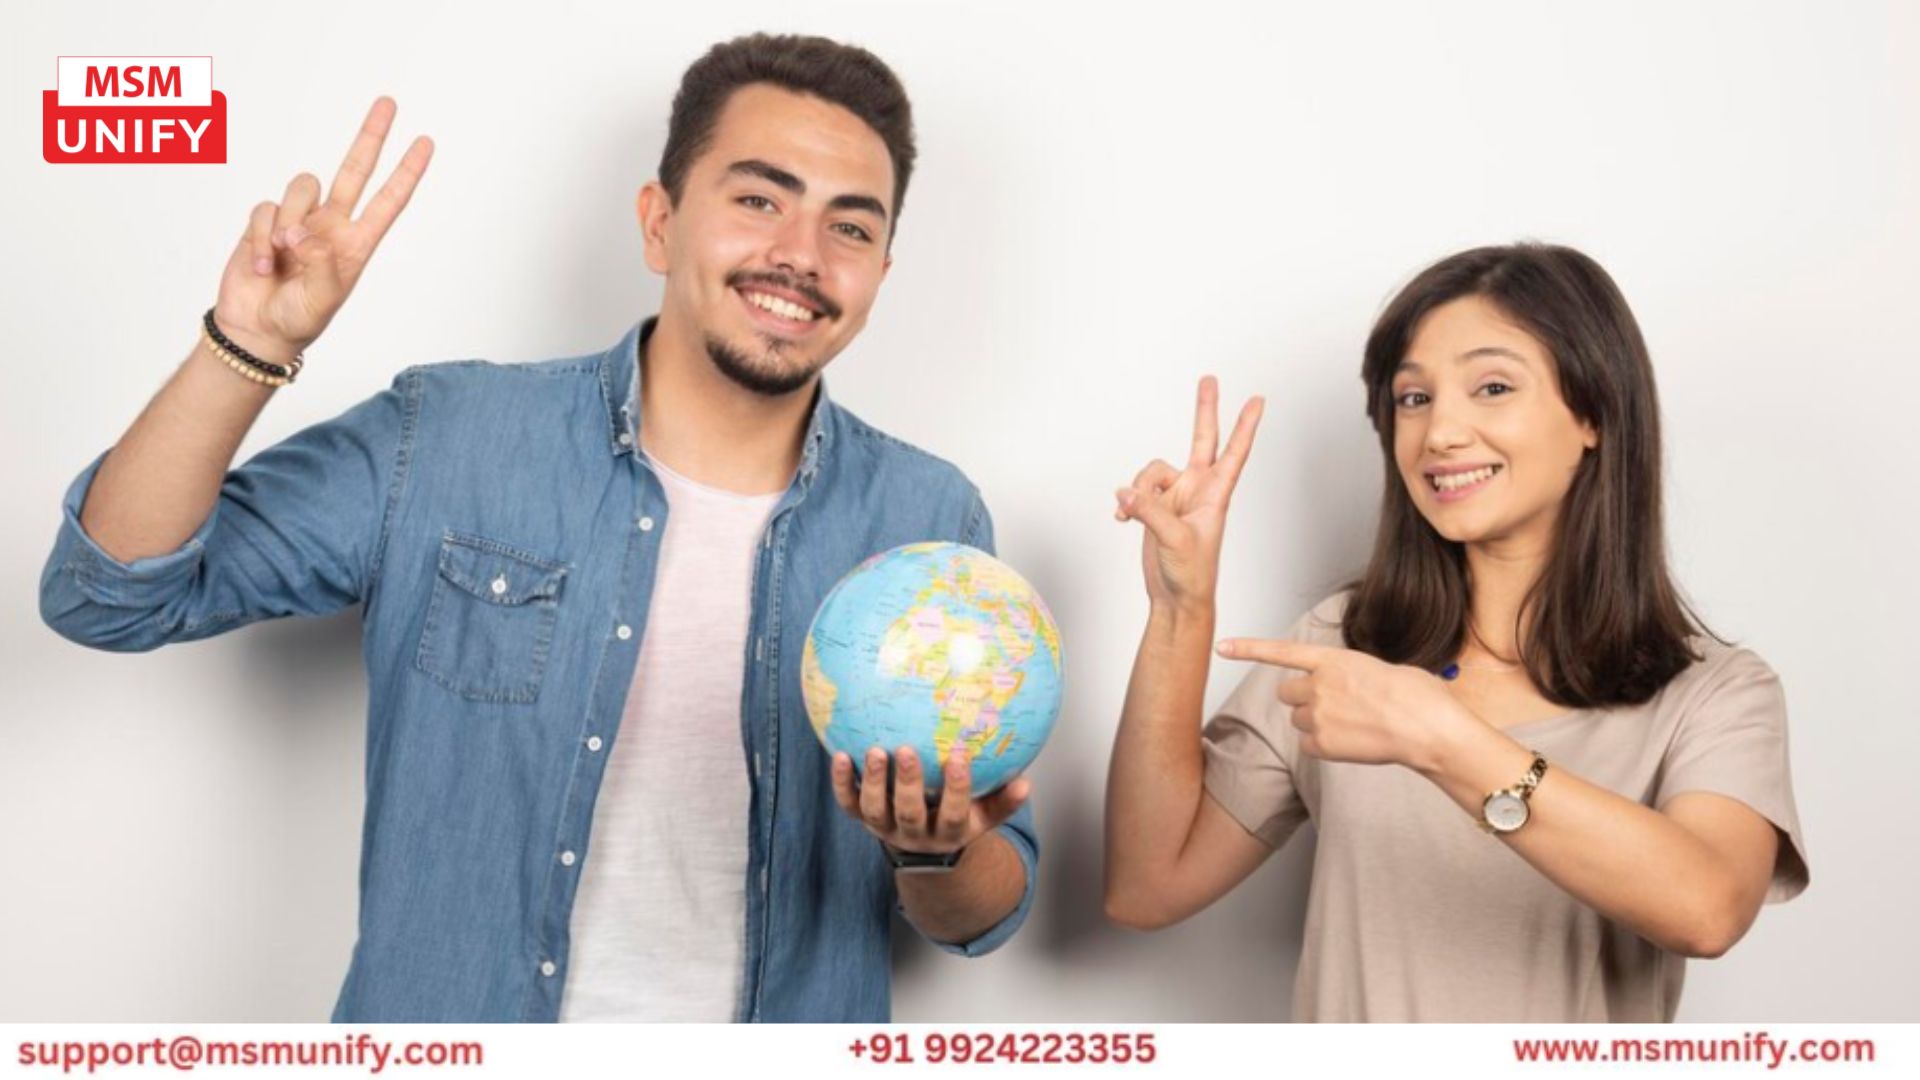 Explore life-changing <a href="https://www.msmunify.com/internships/">internships abroad for Indian students</a>. Gain invaluable experience, broaden your horizons, and build an international network. Start your journey now!




